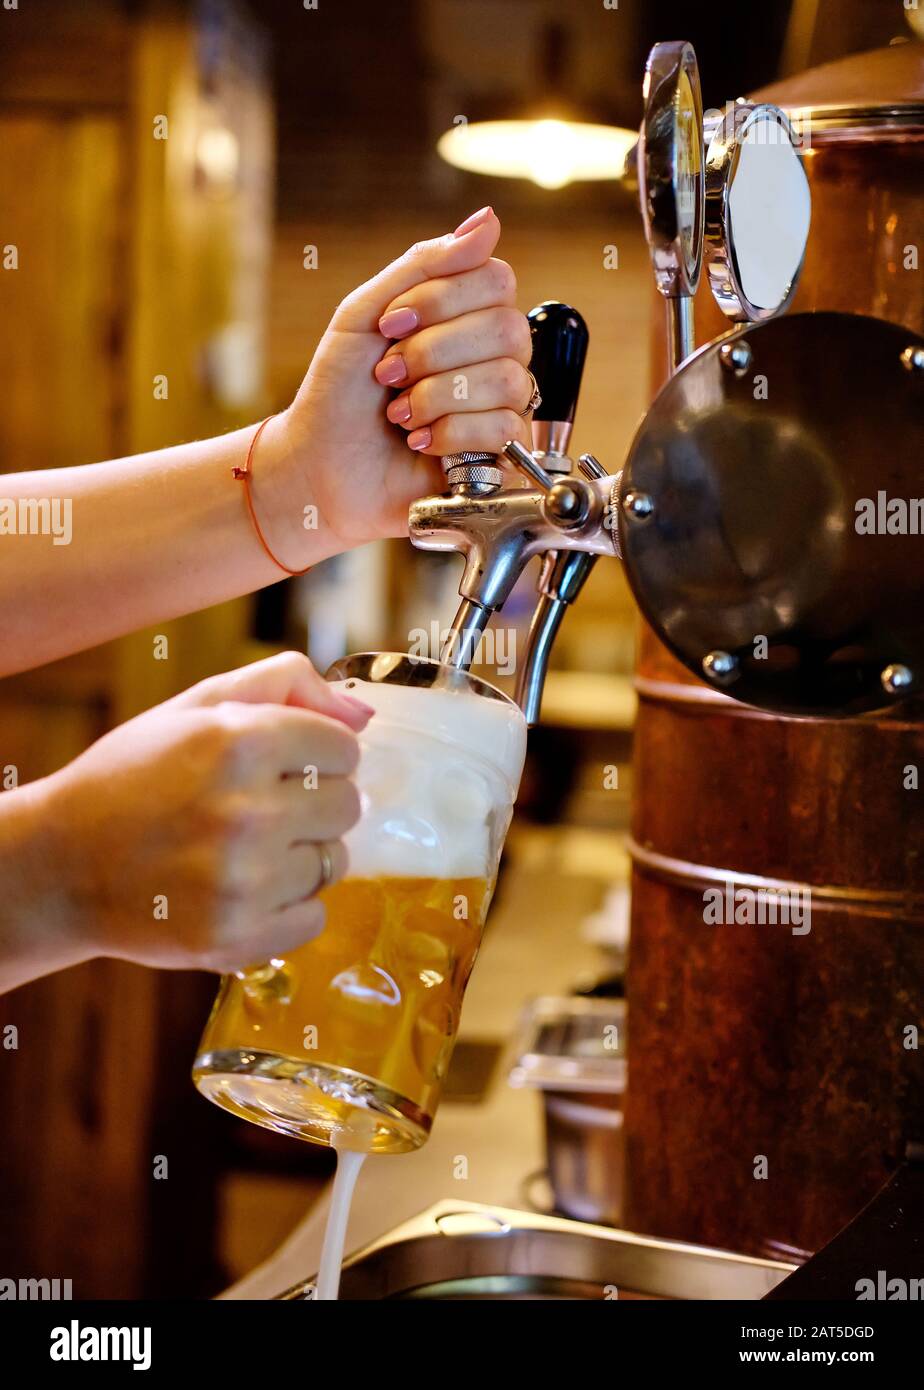 Vertical image close up view female barman hands pouring beer in mug, alcohol beverage served from a tap Stock Photo